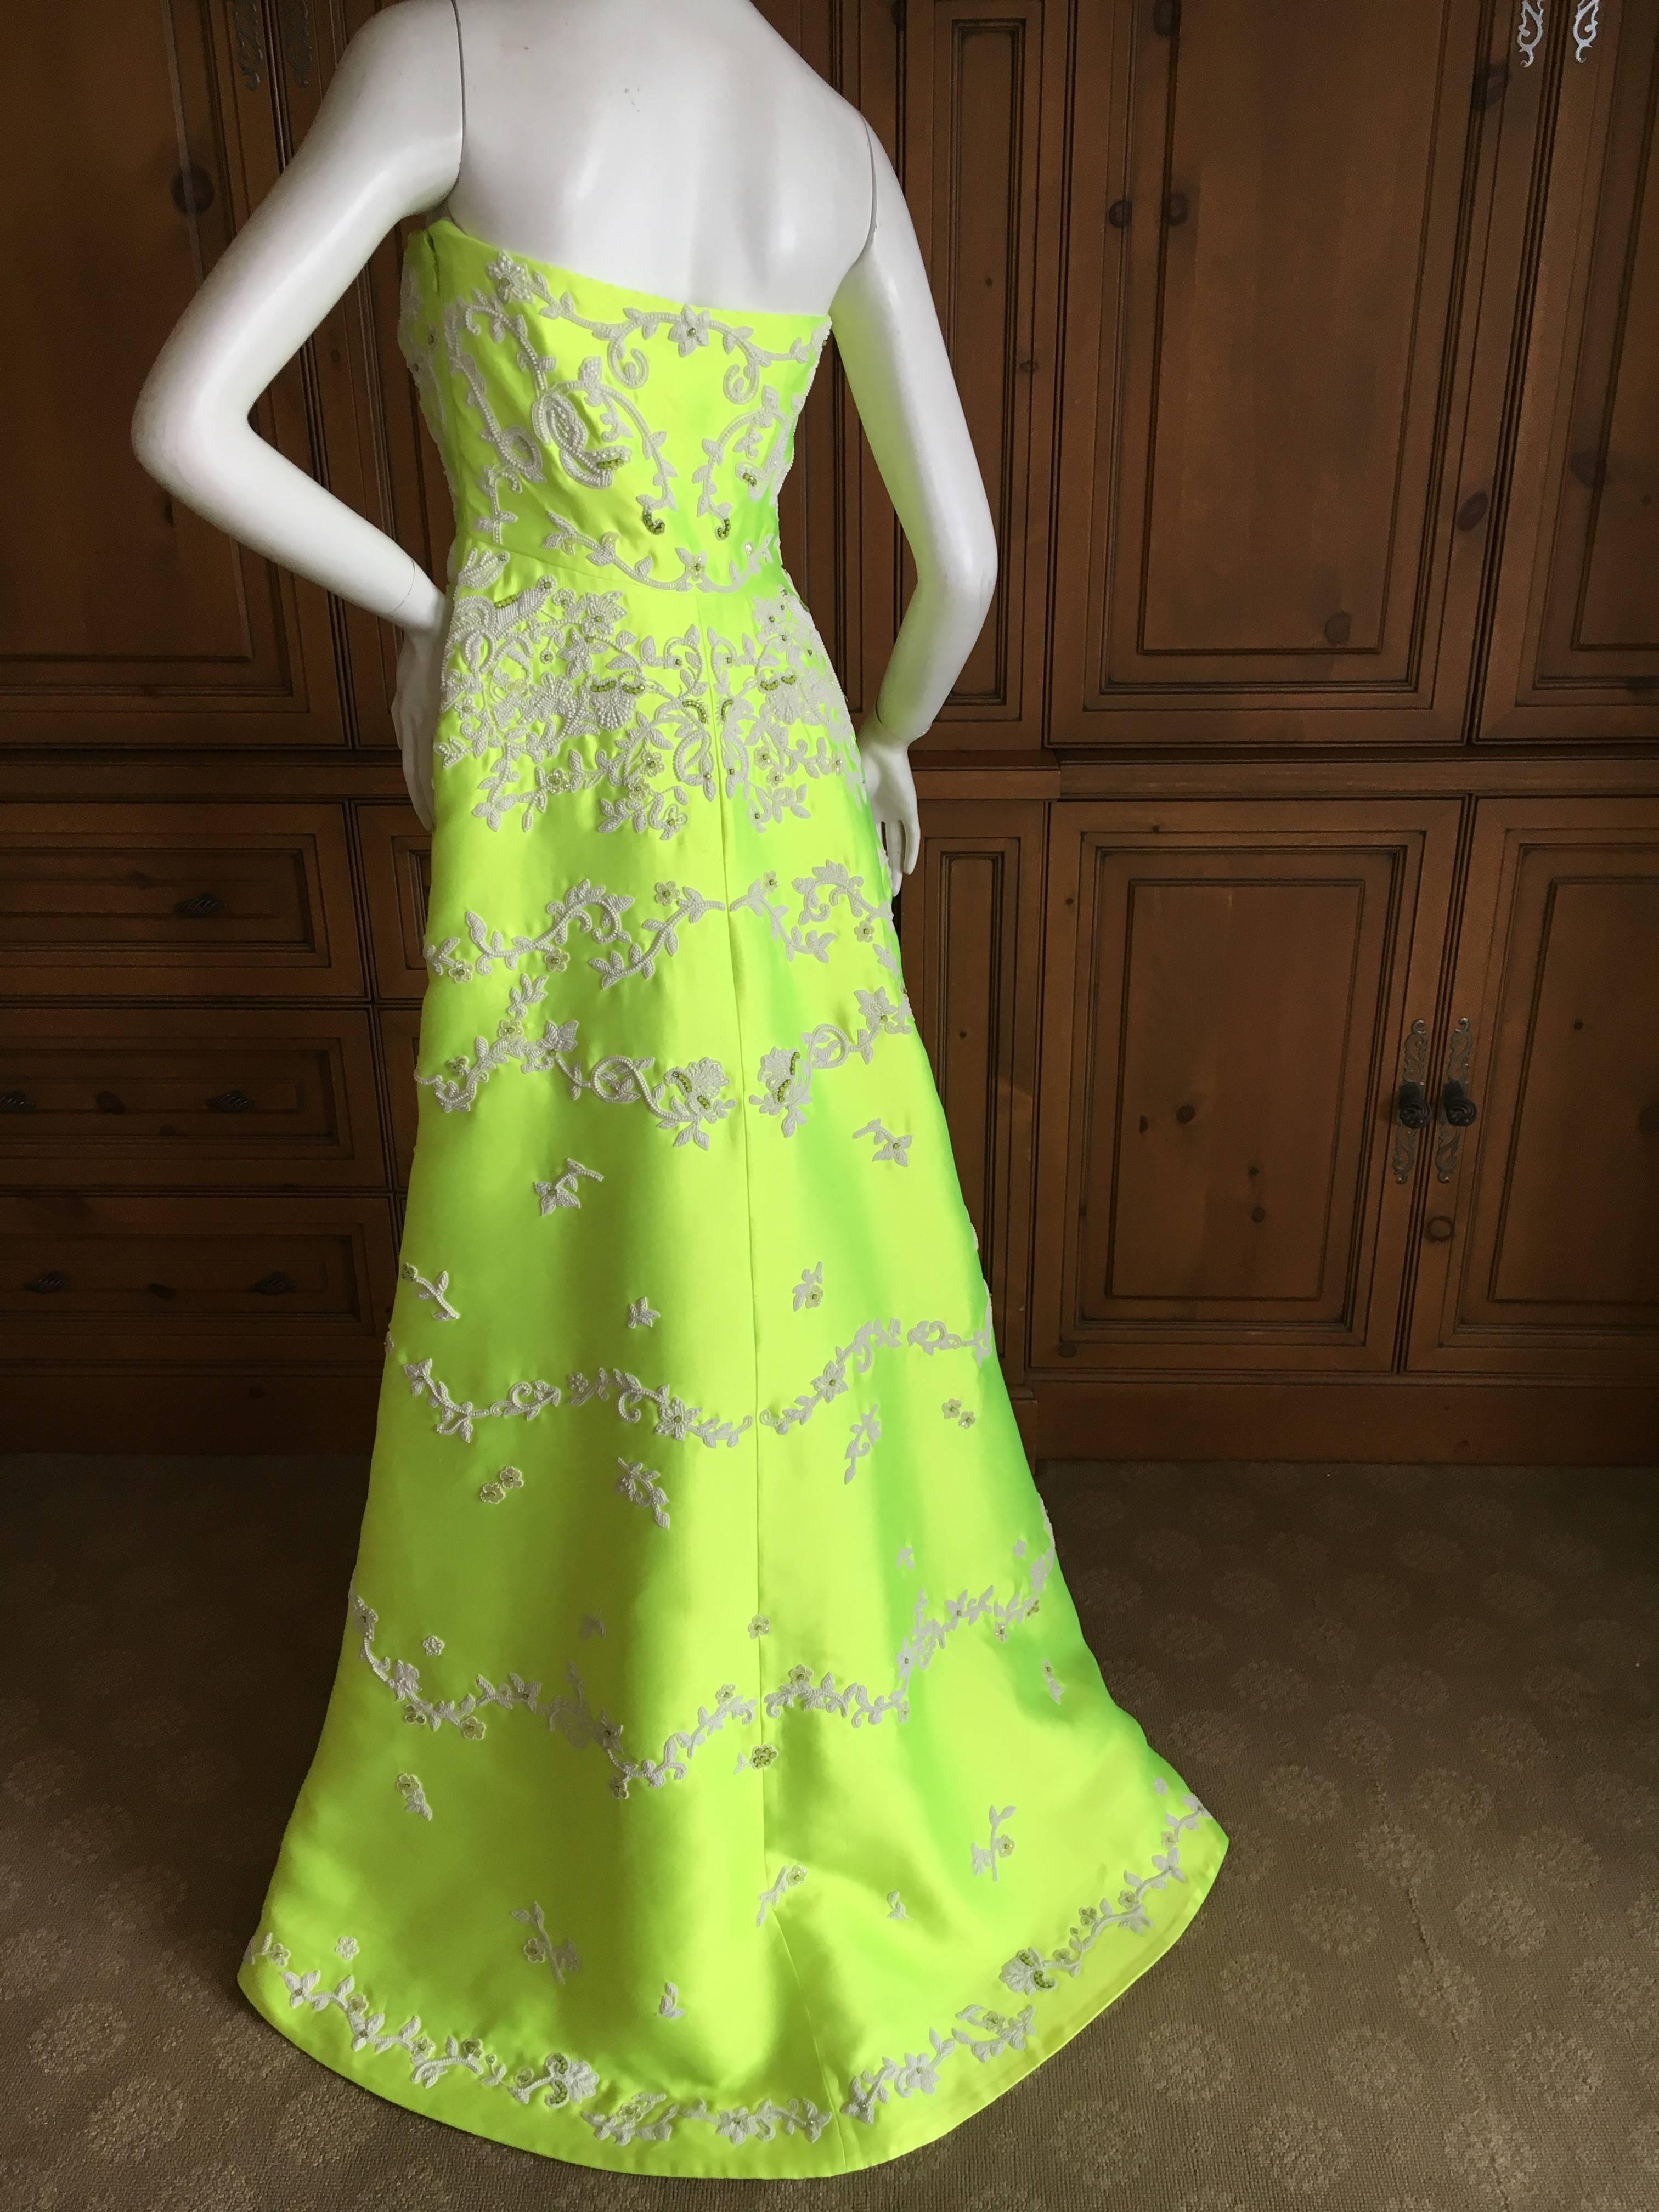 Valentino Neon Yellow Duchesse Satin Pearl Embellished Dress NWT $11, 000 For Sale 2